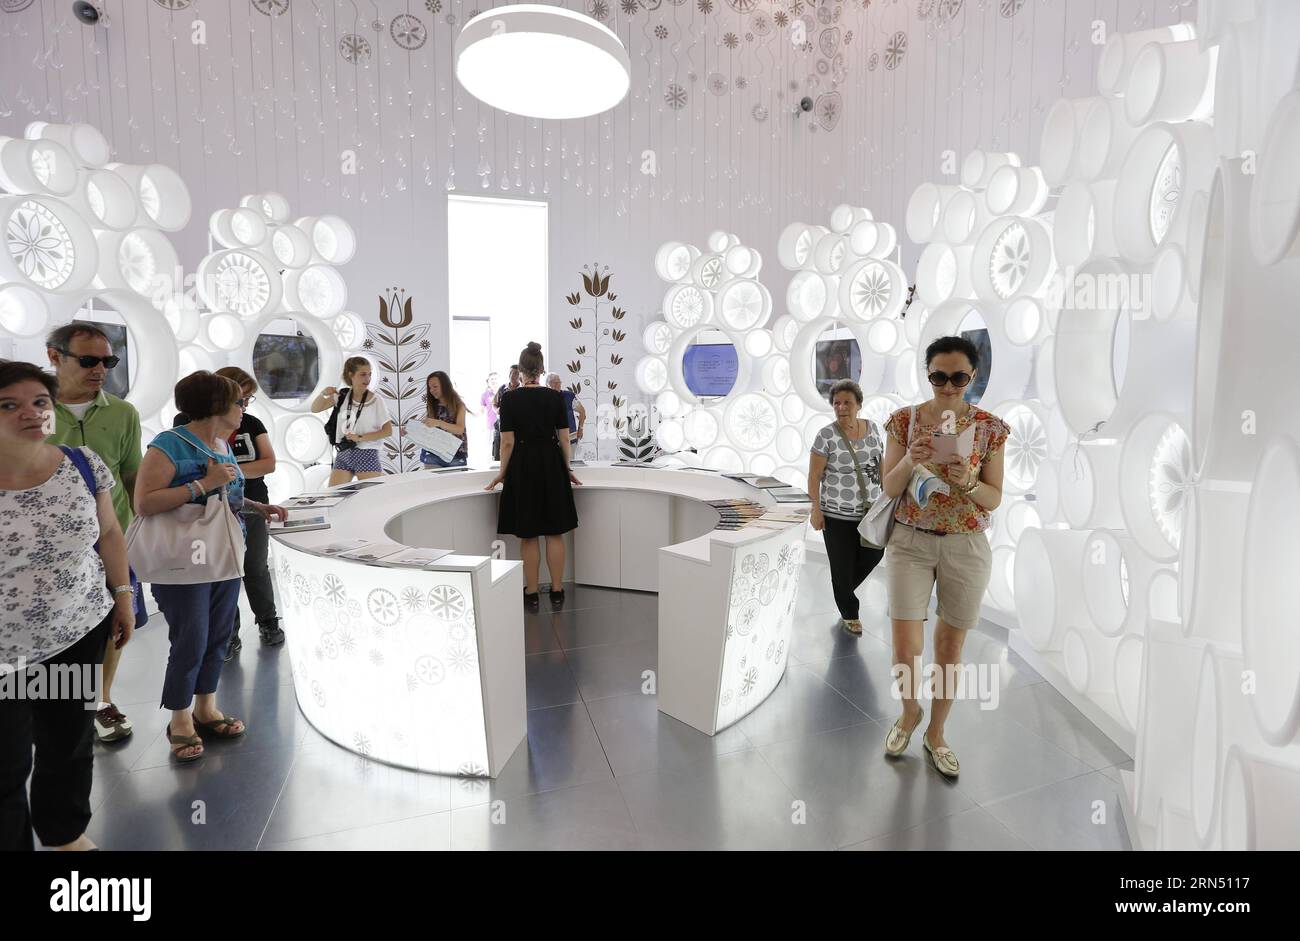 (150607) -- MILAN, June 7, 2015 -- People visit Lithuania Pavilion at Milan Expo in Milan, Italy, June 7, 2015. The exhibition runs from May 1 to October 31 with the theme of Feeding the Planet, Energy for Life . ) ITALY-MILAN-EXPO YexPingfan PUBLICATIONxNOTxINxCHN   Milan June 7 2015 Celebrities Visit Lithuania Pavilion AT Milan EXPO in Milan Italy June 7 2015 The Exhibition runs from May 1 to October 31 With The Theme of Feeding The Planet Energy for Life Italy Milan EXPO YexPingfan PUBLICATIONxNOTxINxCHN Stock Photo